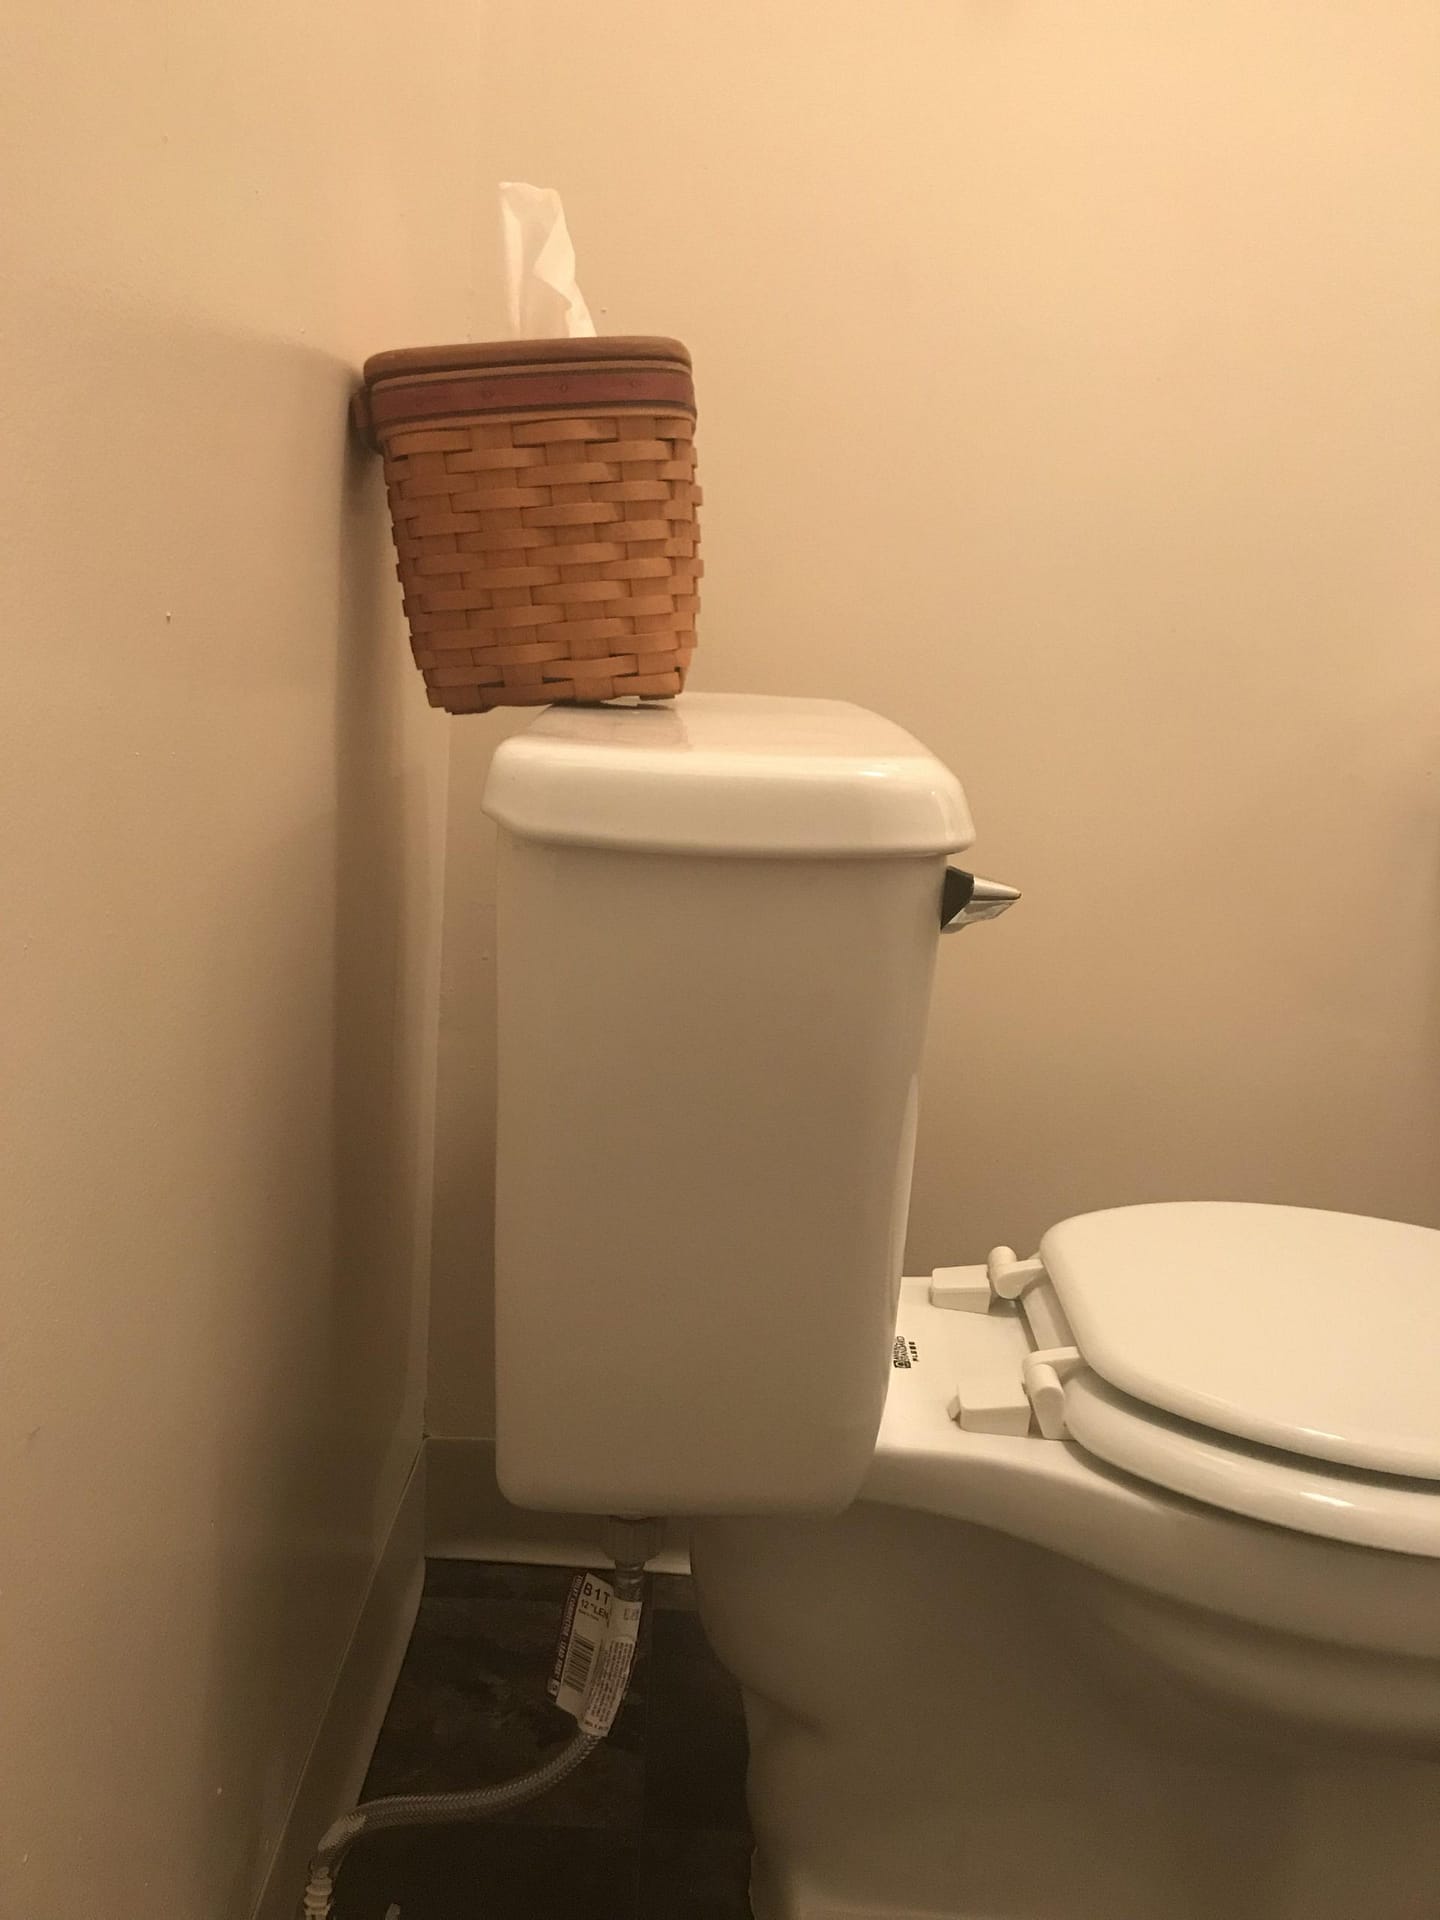 Toilet Too Far From Wall? Here’s How To Move It Closer 